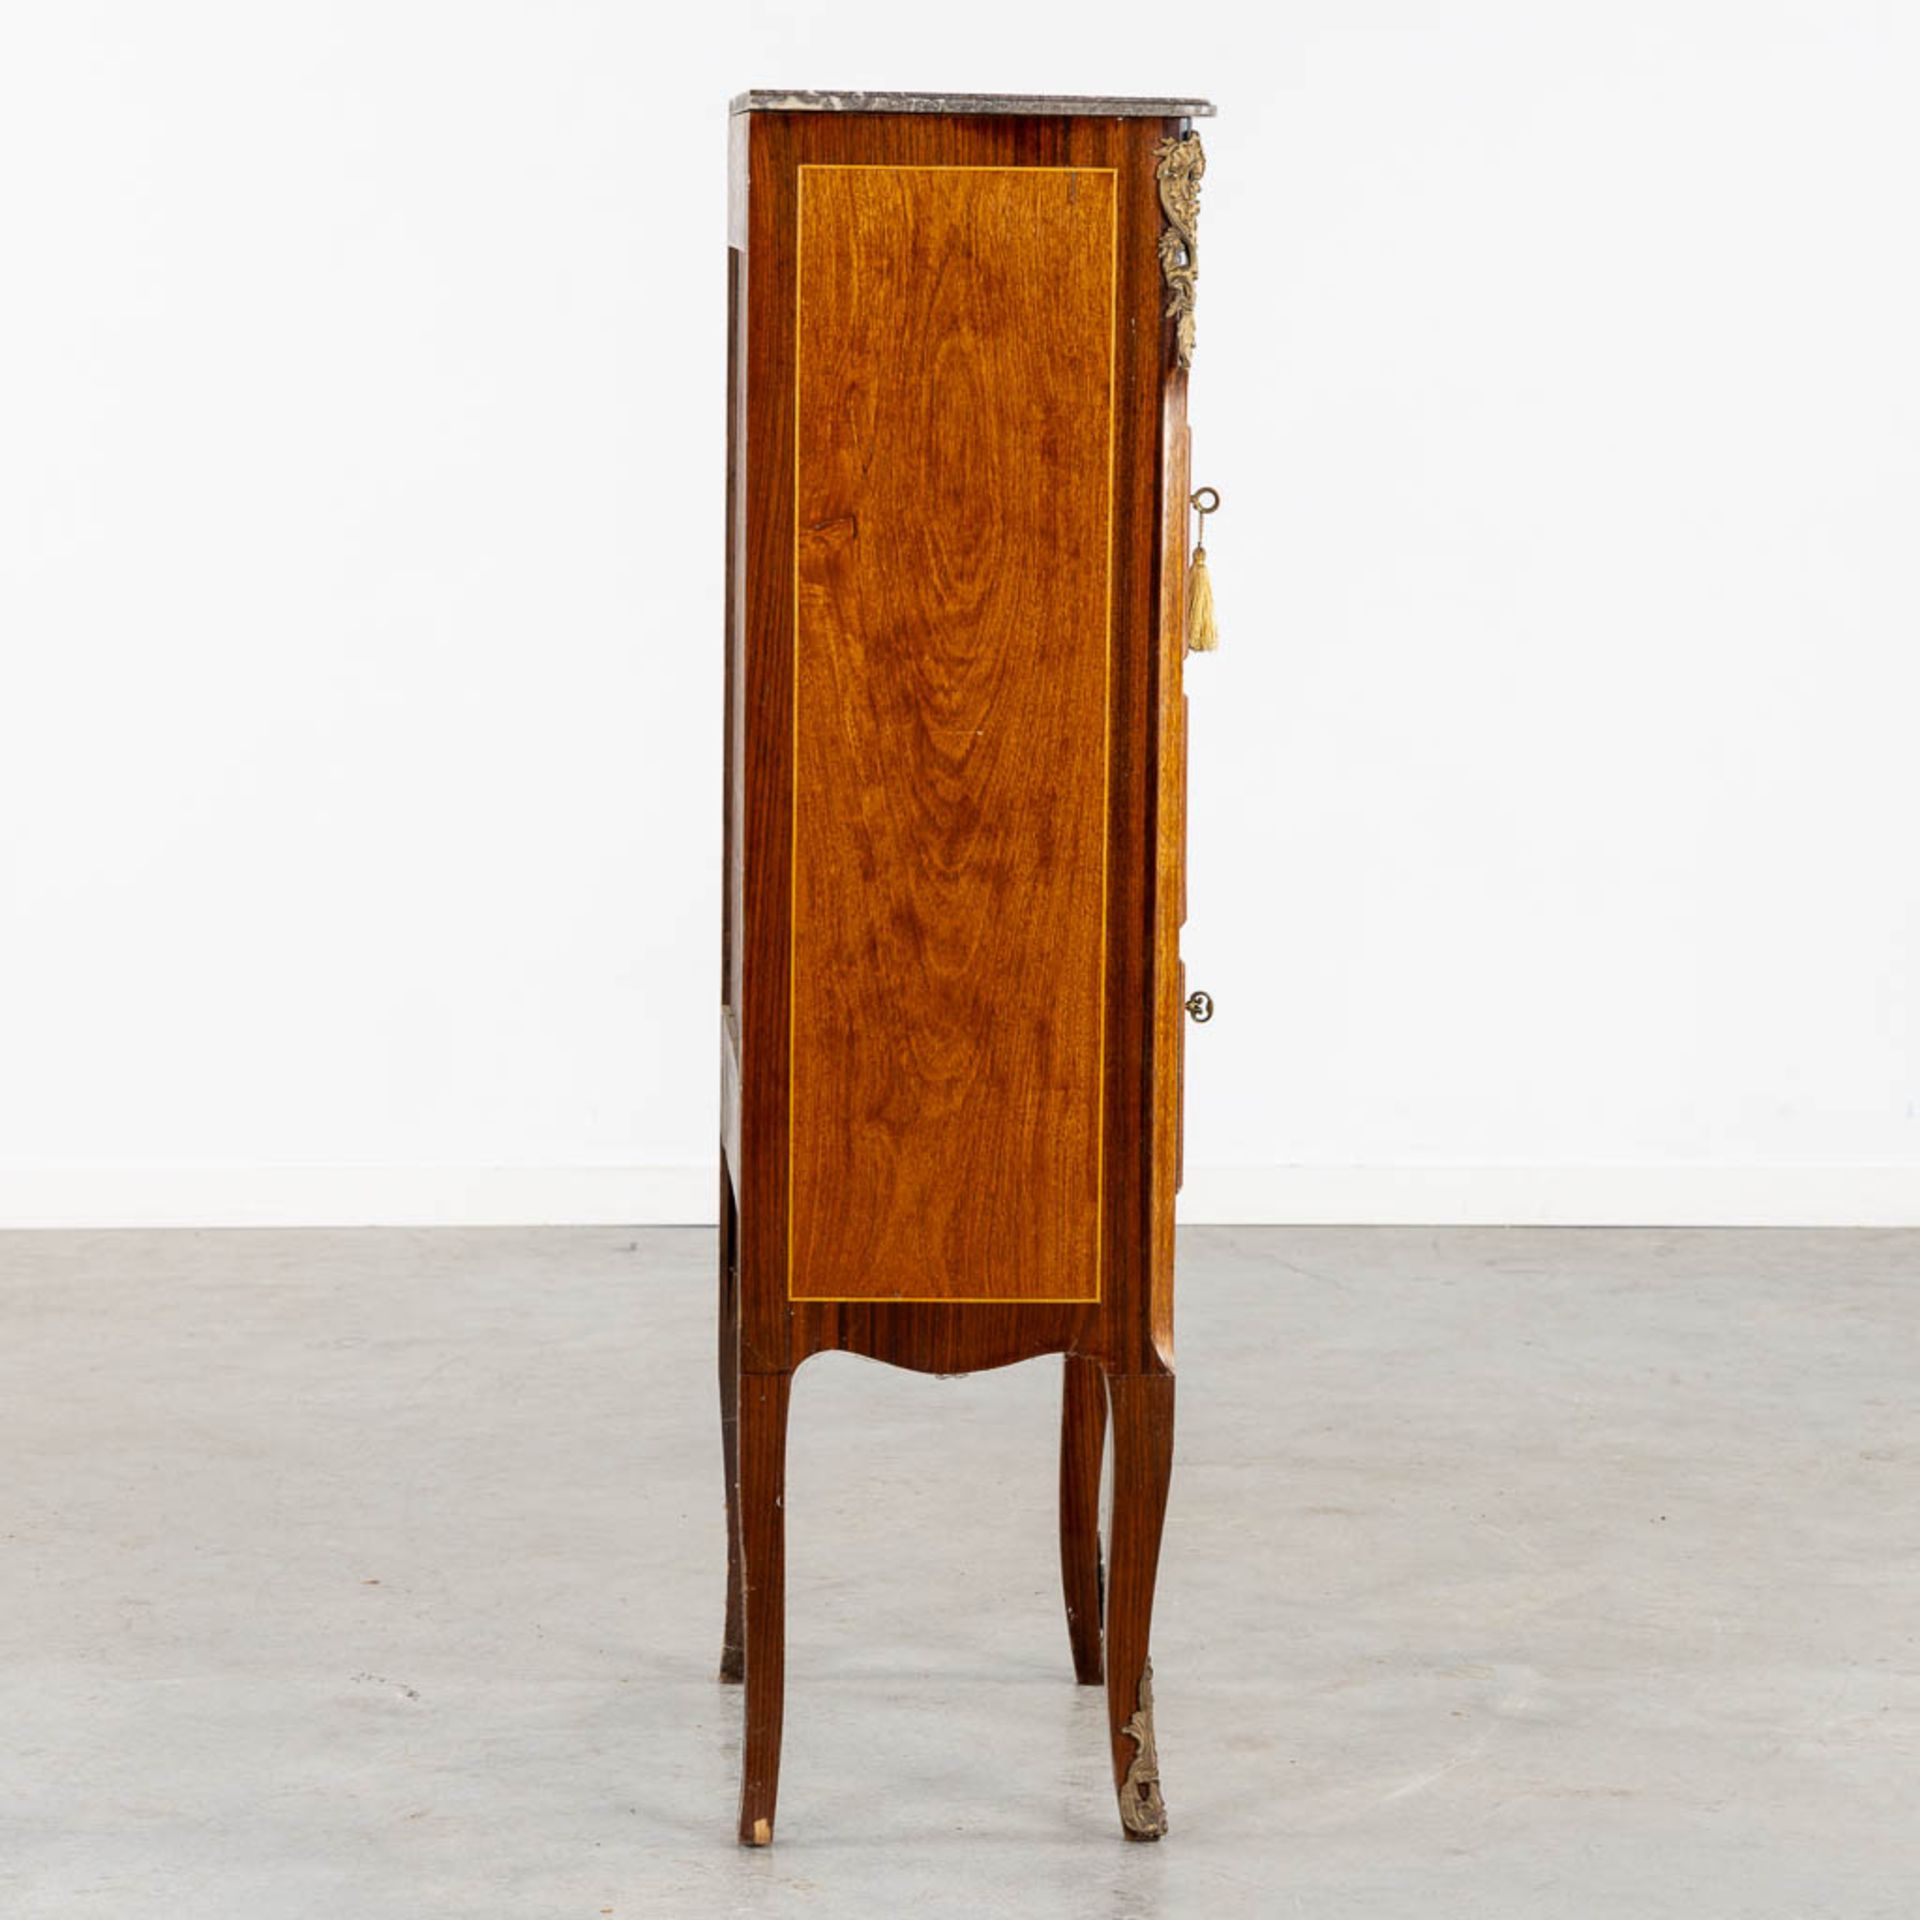 A Secretaire cabinet, Marquetry inlay and mounted with bronze. Circa 1900. (L:34 x W:56 x H:128 cm) - Bild 9 aus 15